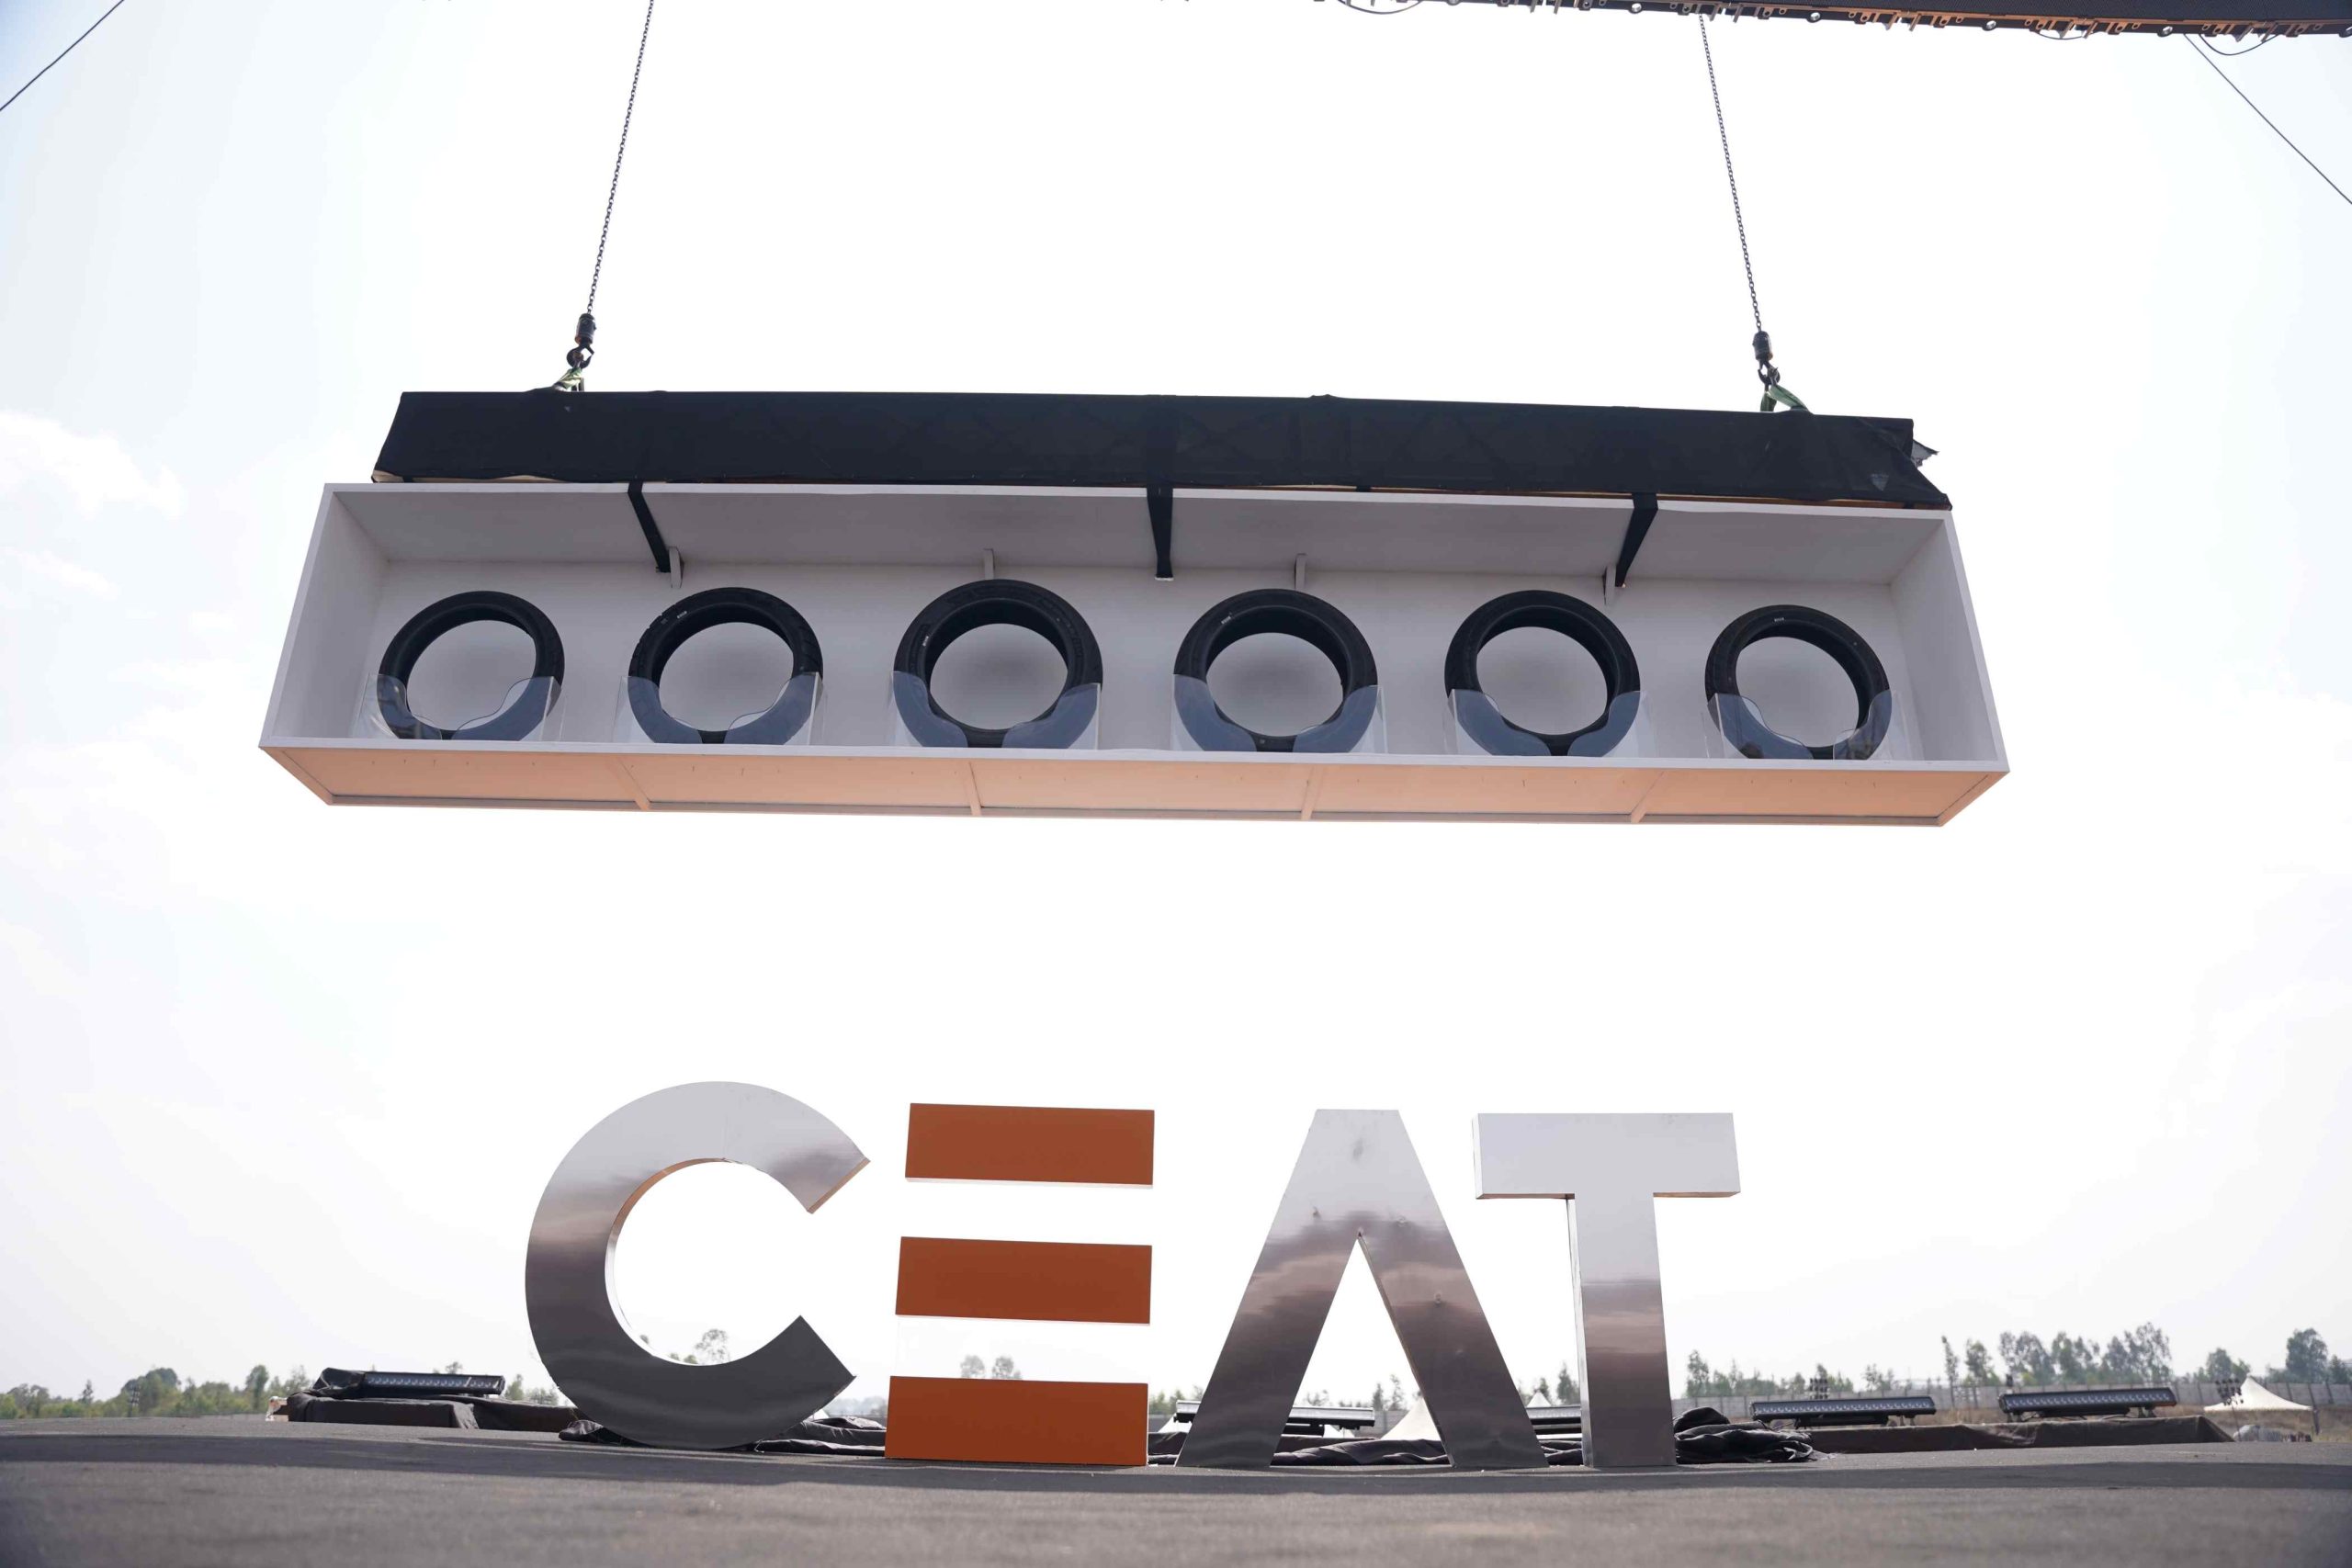 CEAT launches Steel Rad tyres for High Powered Motorcycles